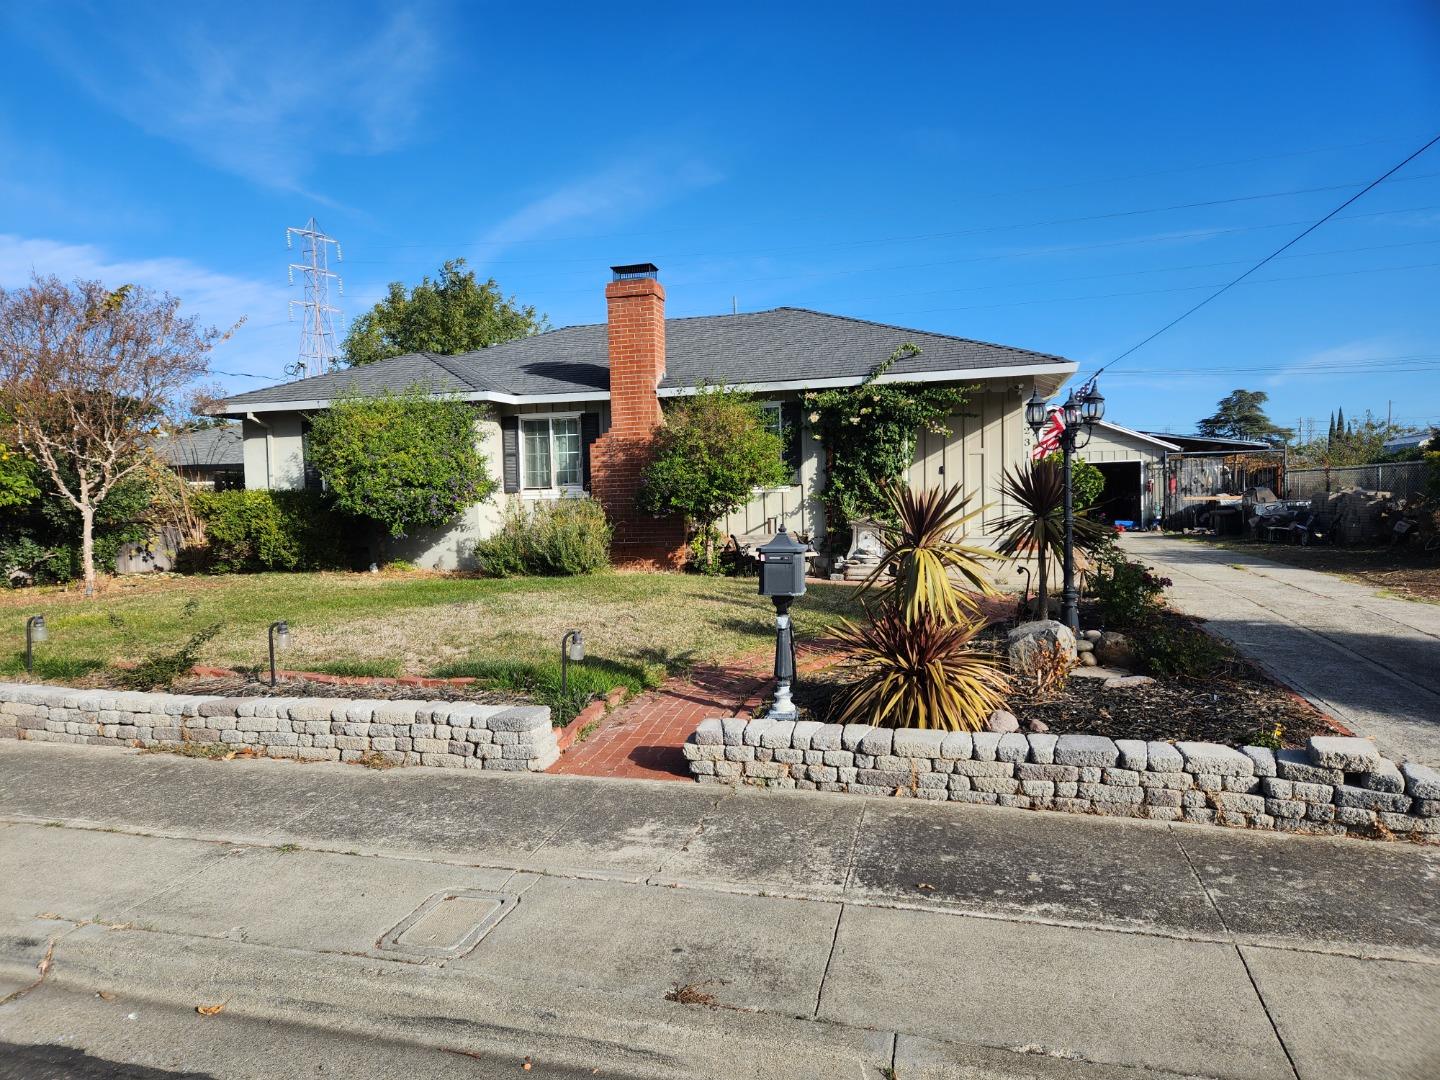 Photo of 1231 Hillcrest Ave in Antioch, CA